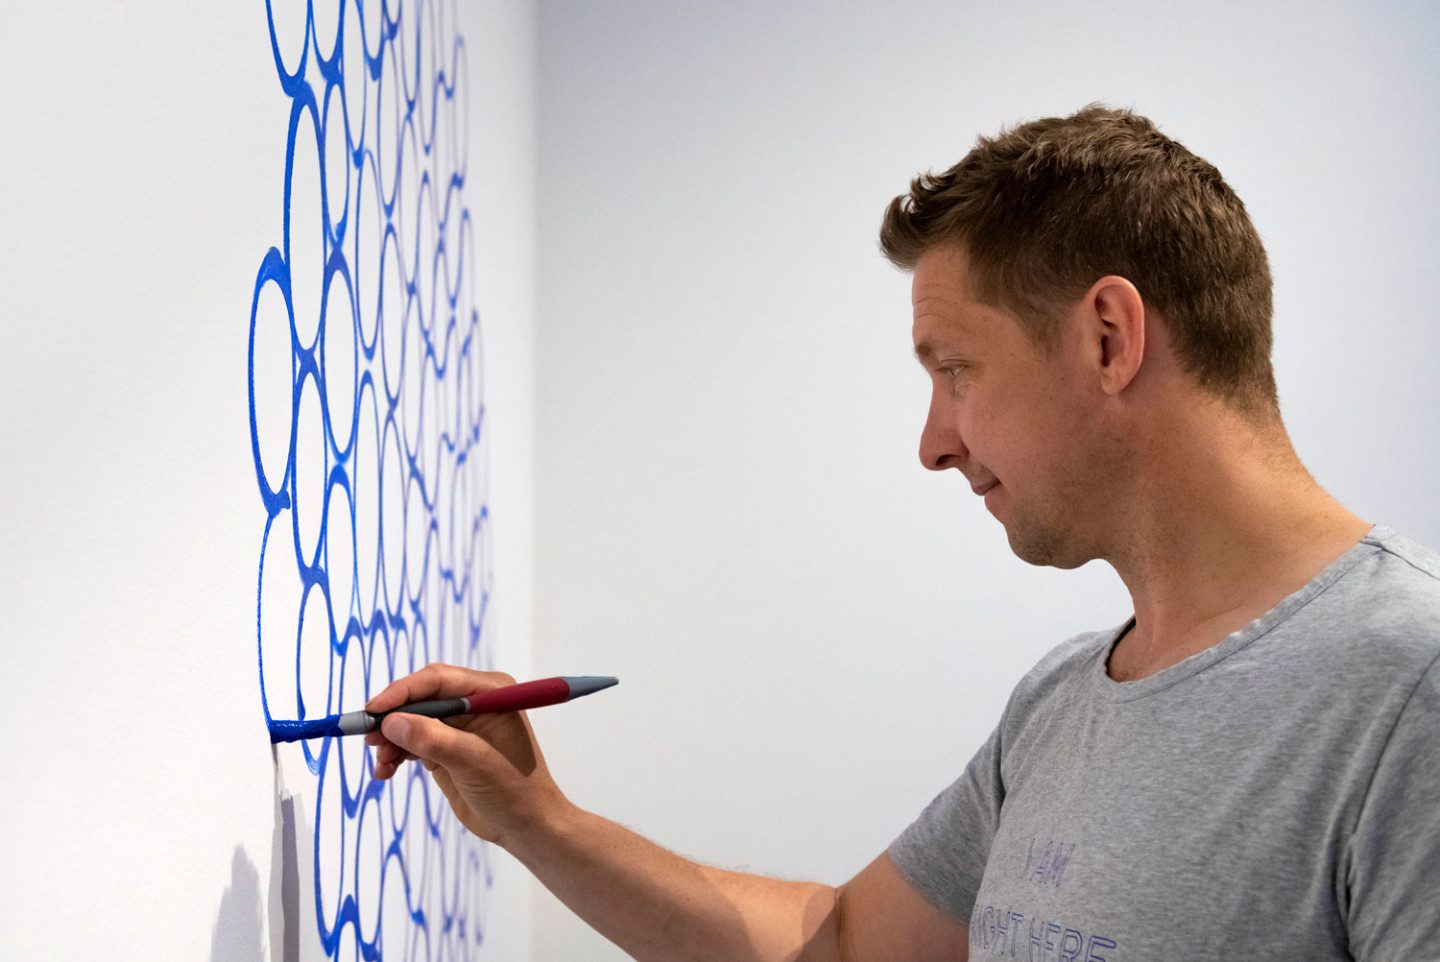 The artist Jeppe Hein paints the work "Today I feel like"